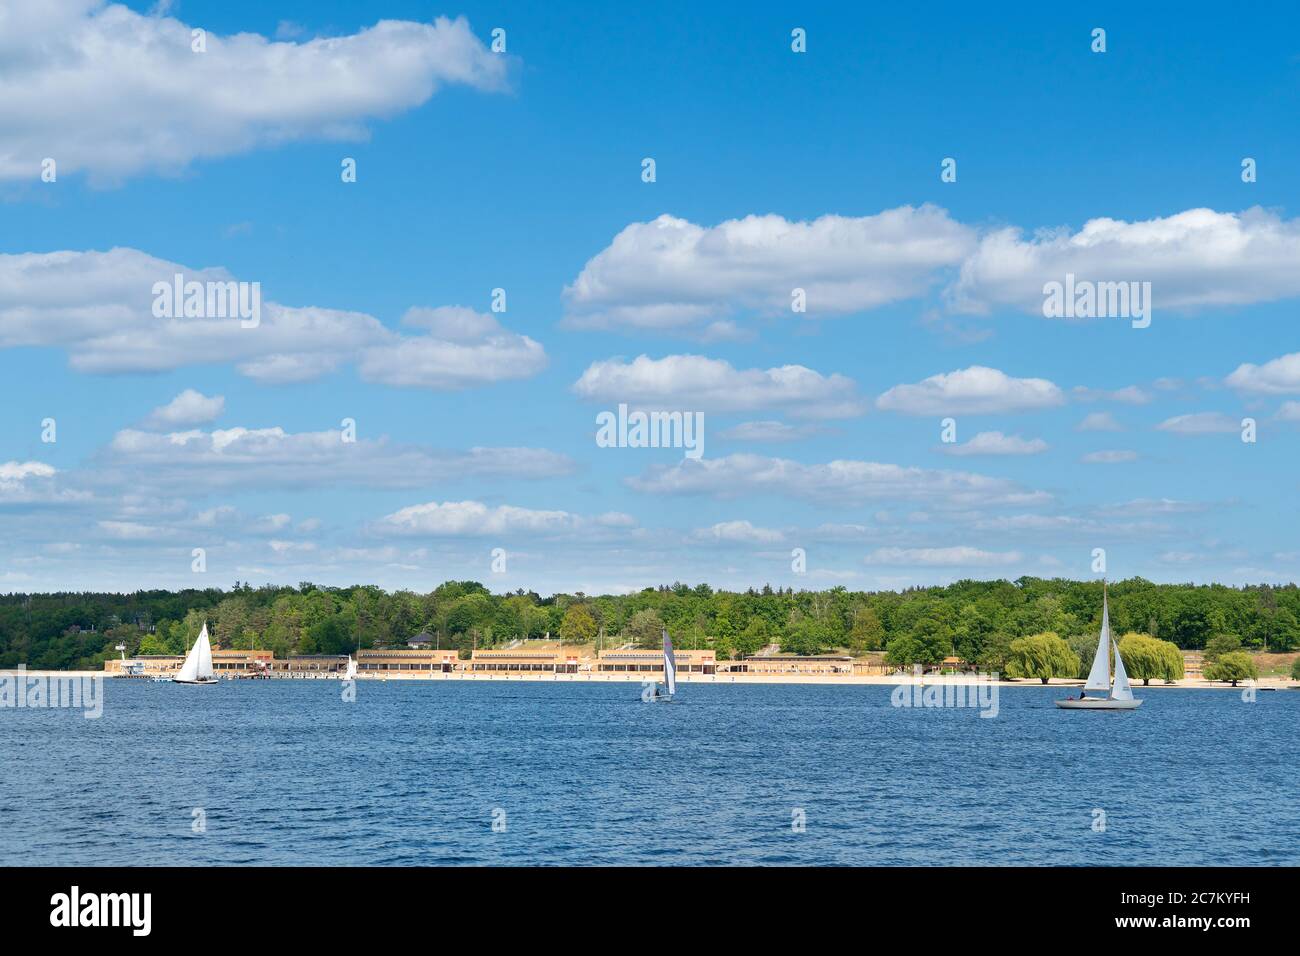 Berlin, Wannsee, view to the Wannsee lido, sailing boats, clouds, sky Stock Photo